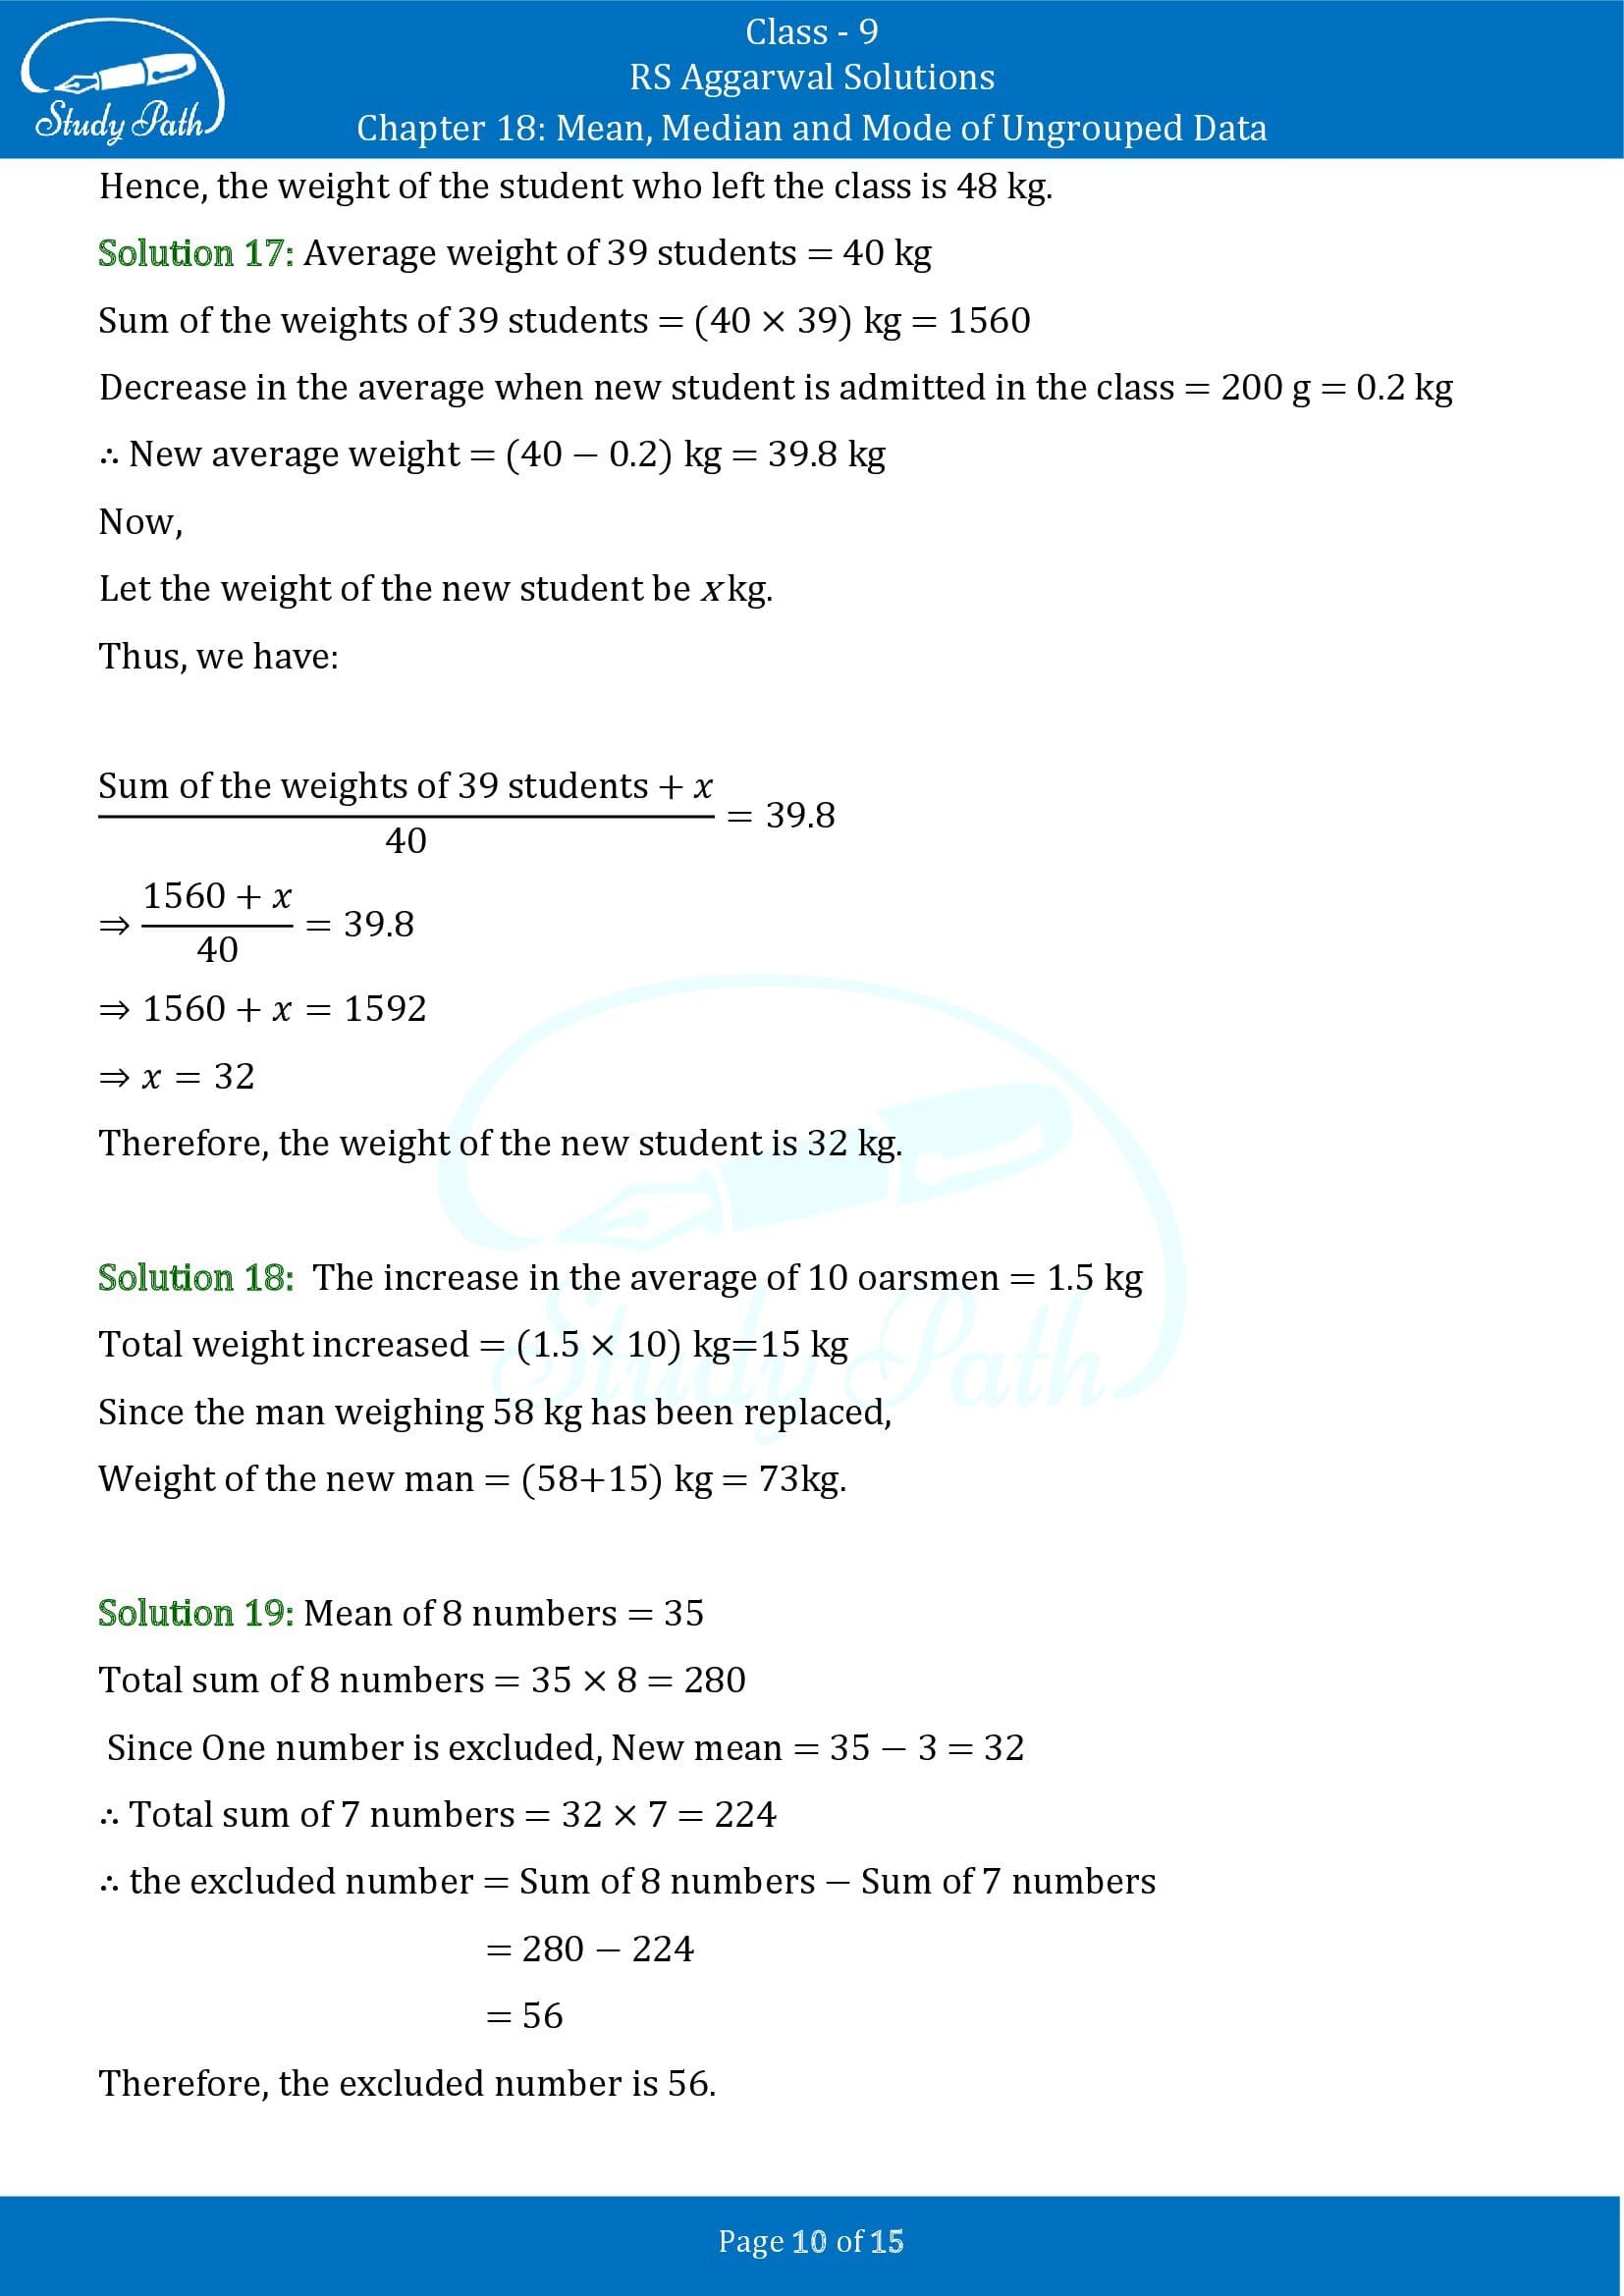 RS Aggarwal Solutions Class 9 Chapter 18 Mean Median and Mode of Ungrouped Data Exercise 18A 00010